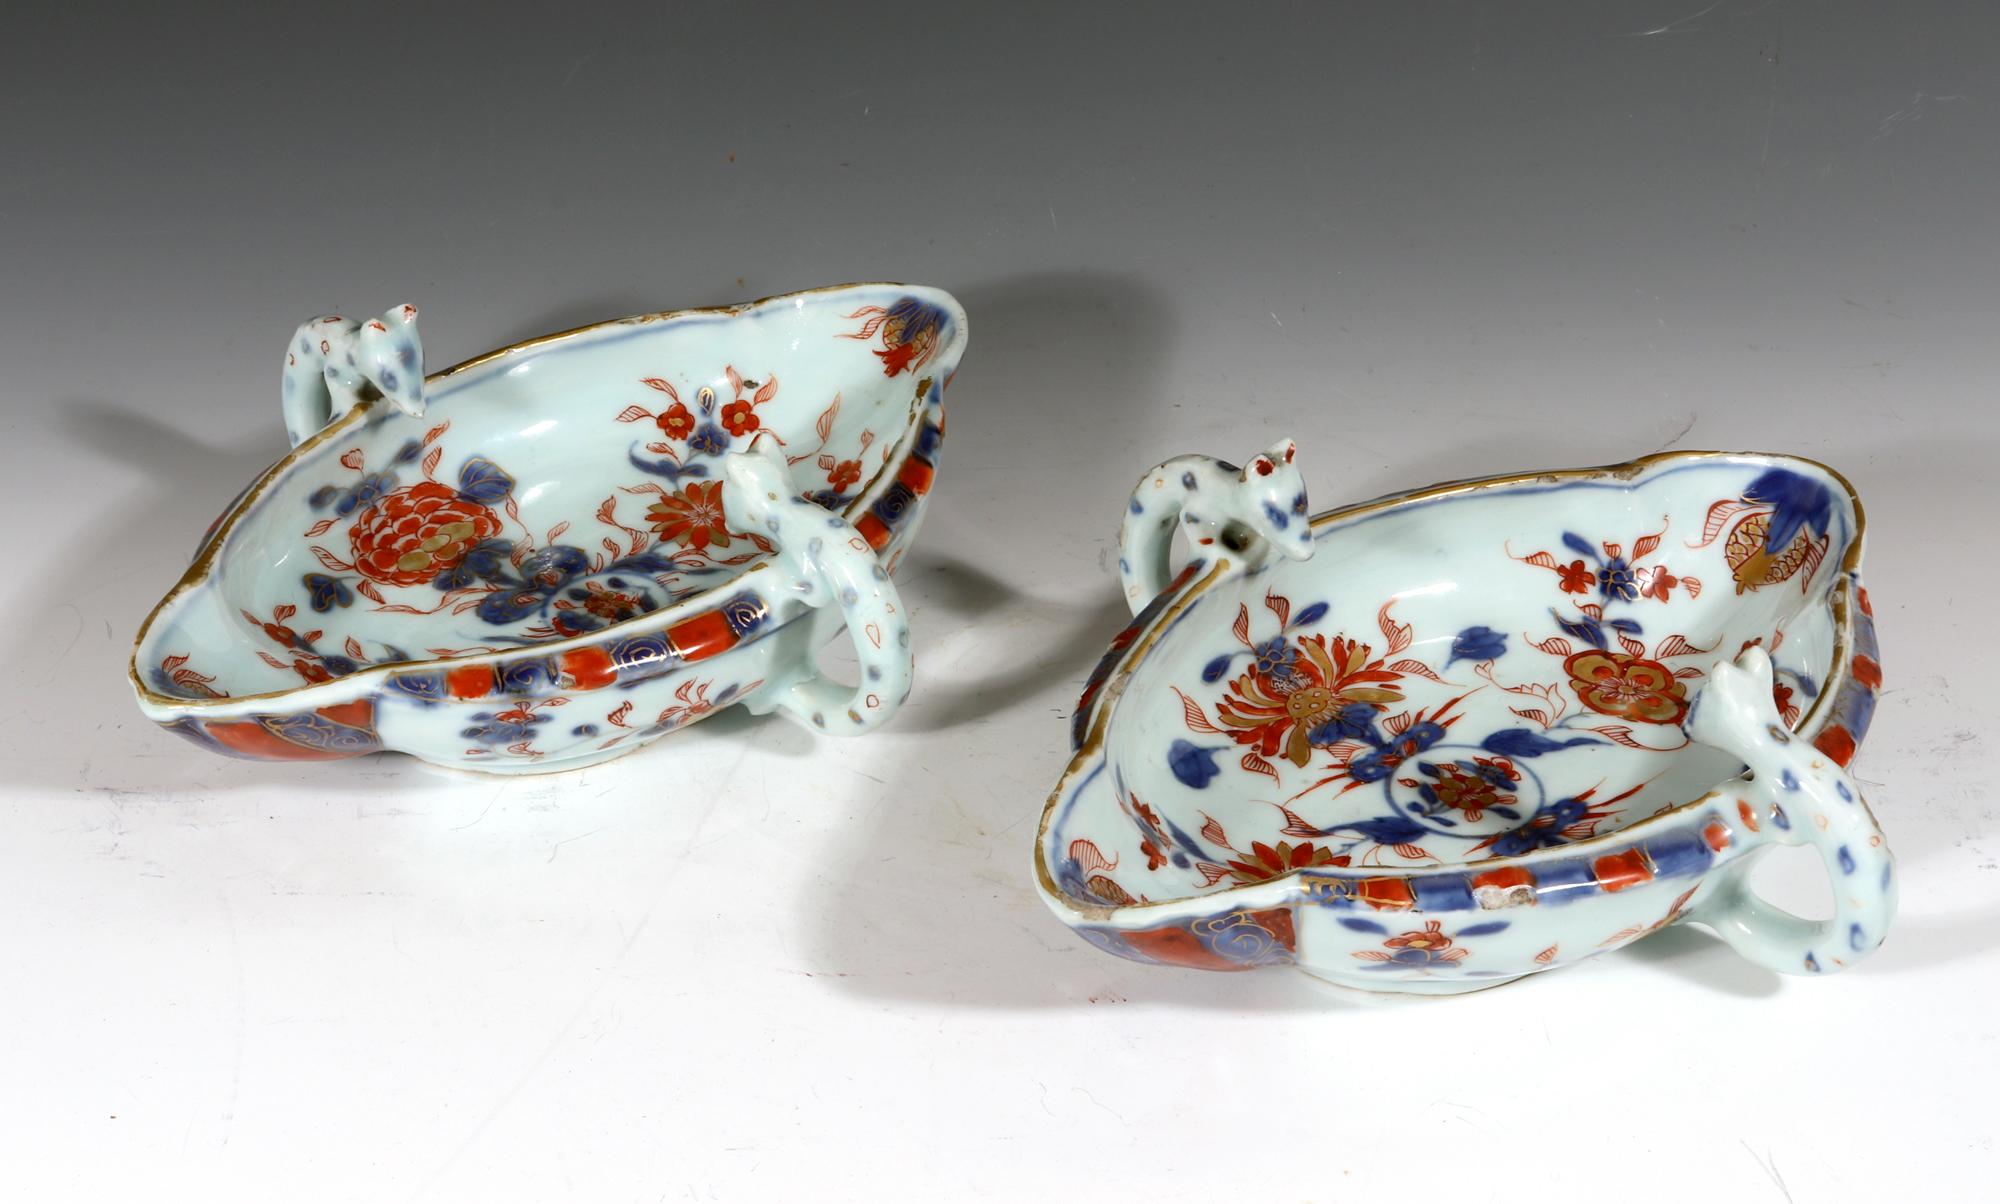 Chinese Export Kangxi period imari sauce boats.
Circa 1700.

The pair of Chinese Export Imari-colored sauce boats have a shaped oval form with handles formed by stylized animals with the heads protruding above the rim peaking into the boat. They